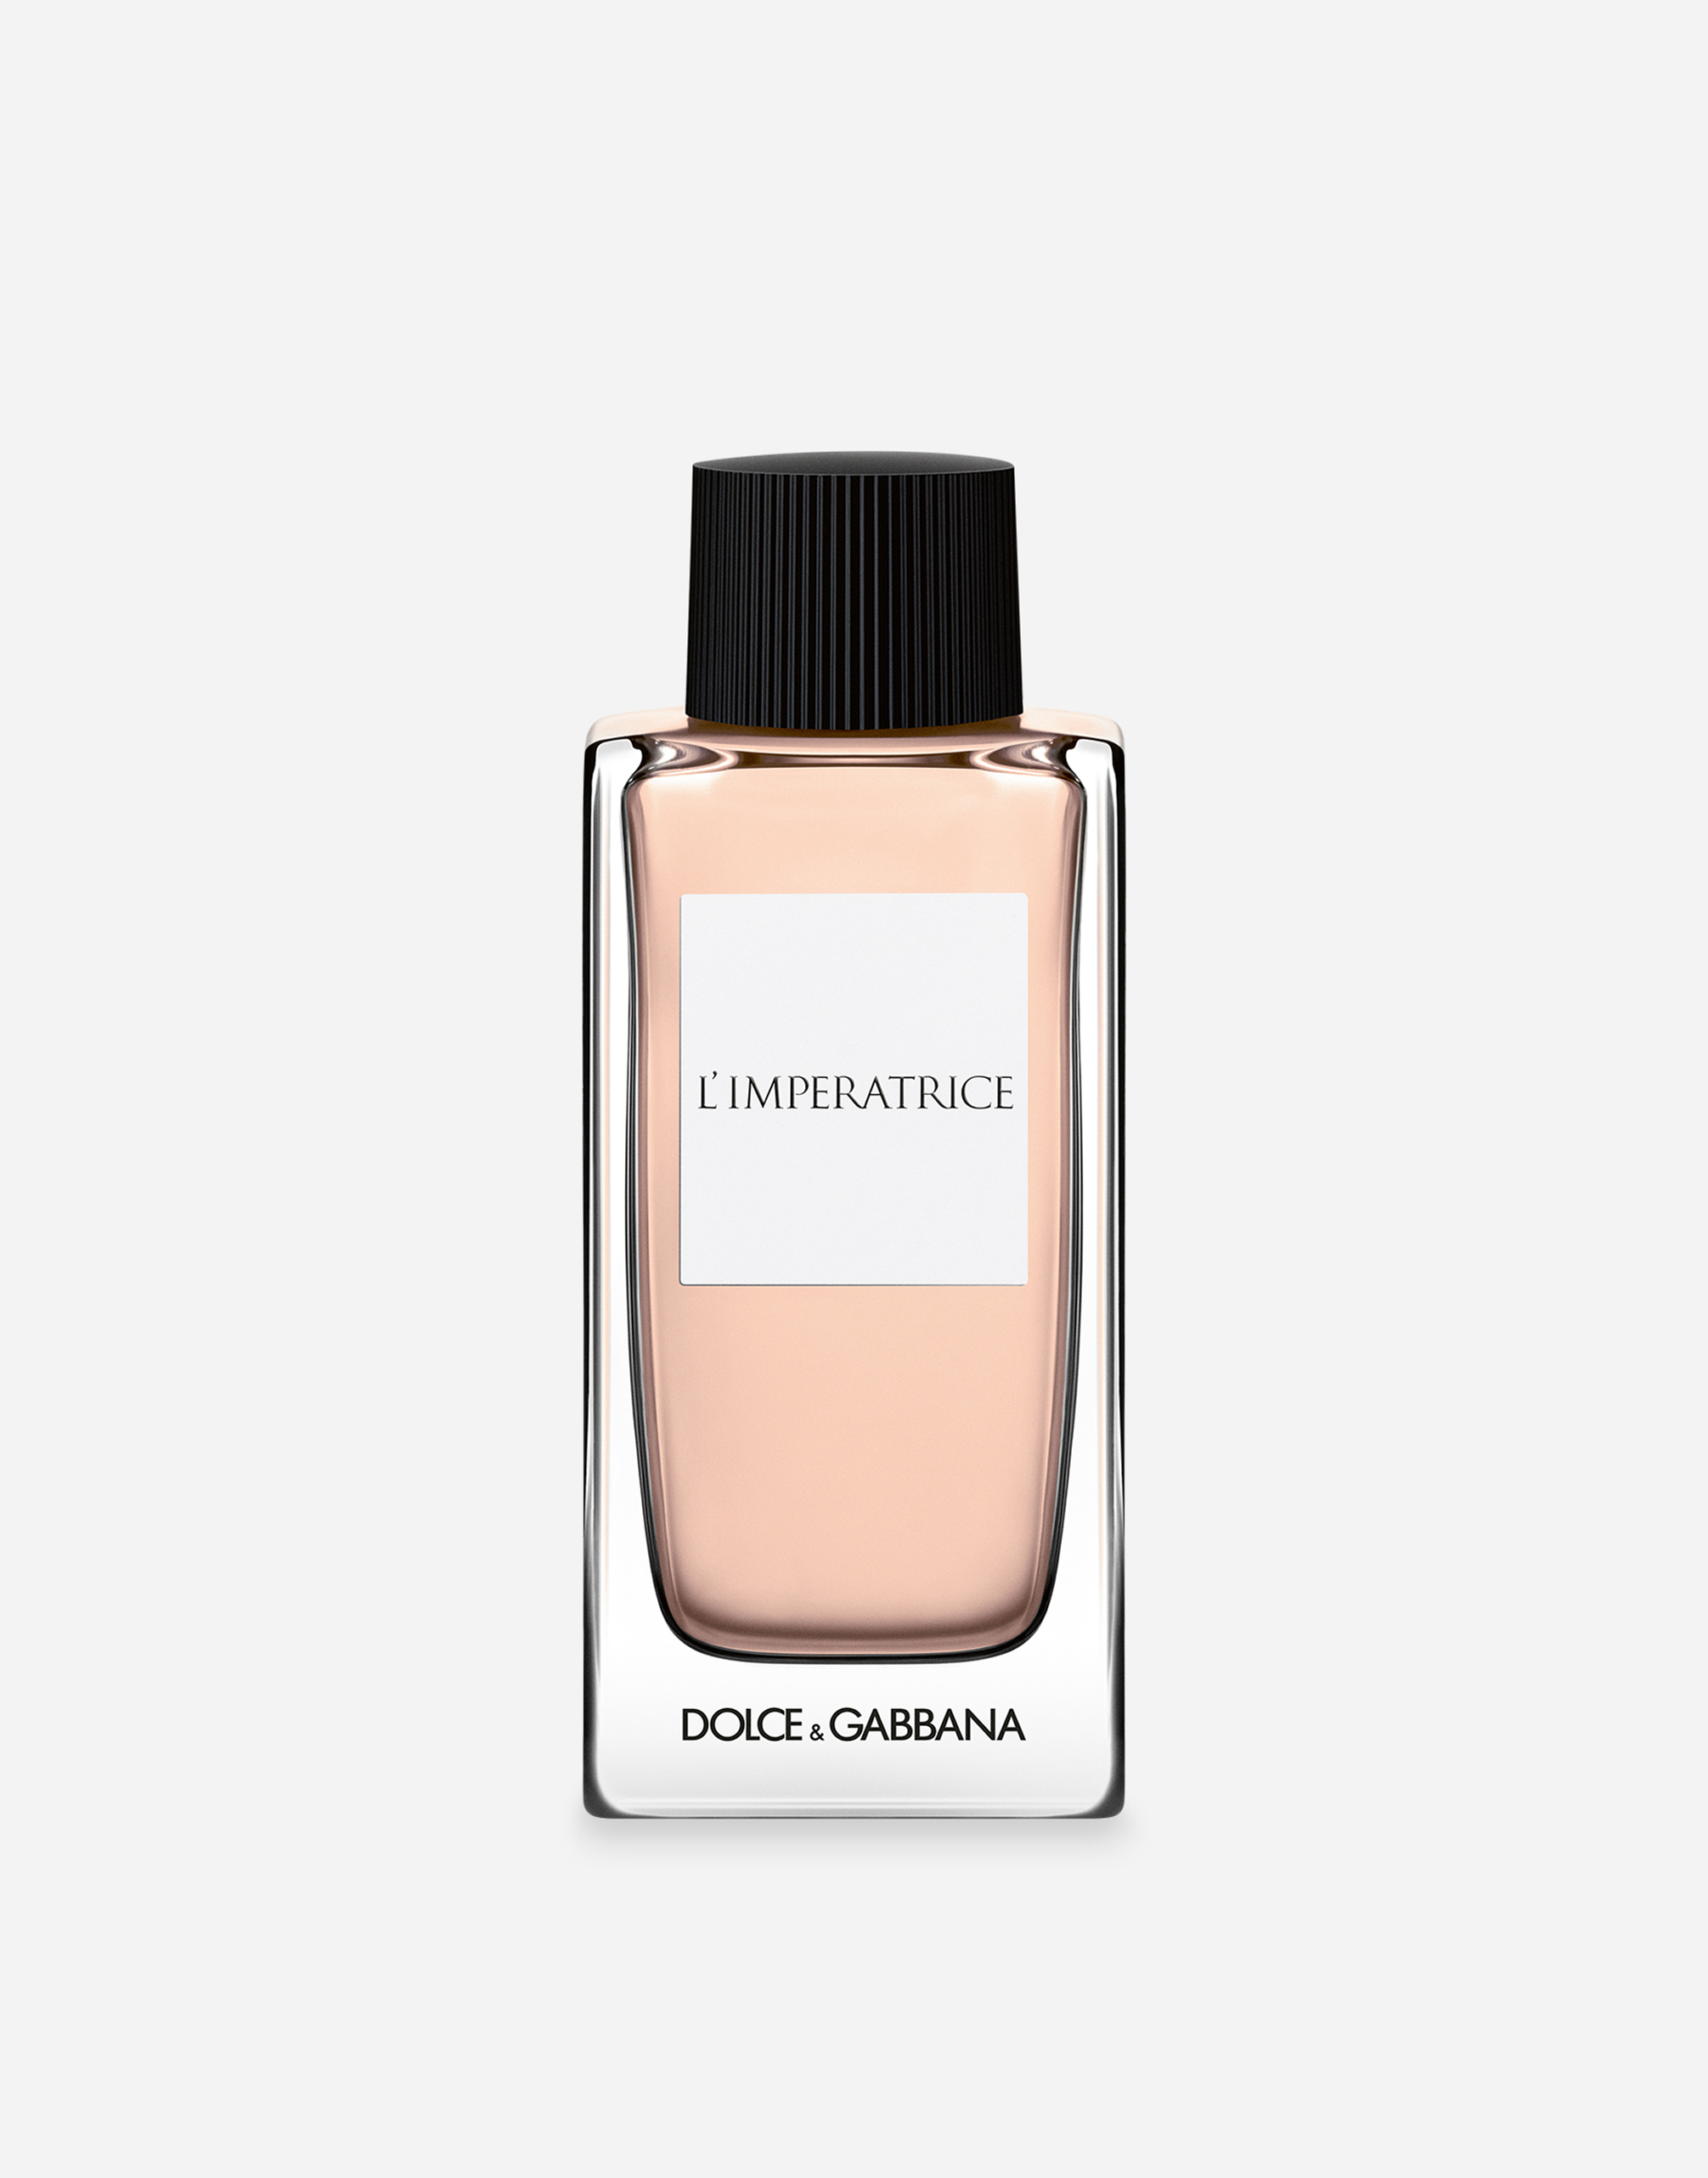 Perfume de mujer L'imperatrice | Dolce&Gabbana Beauty